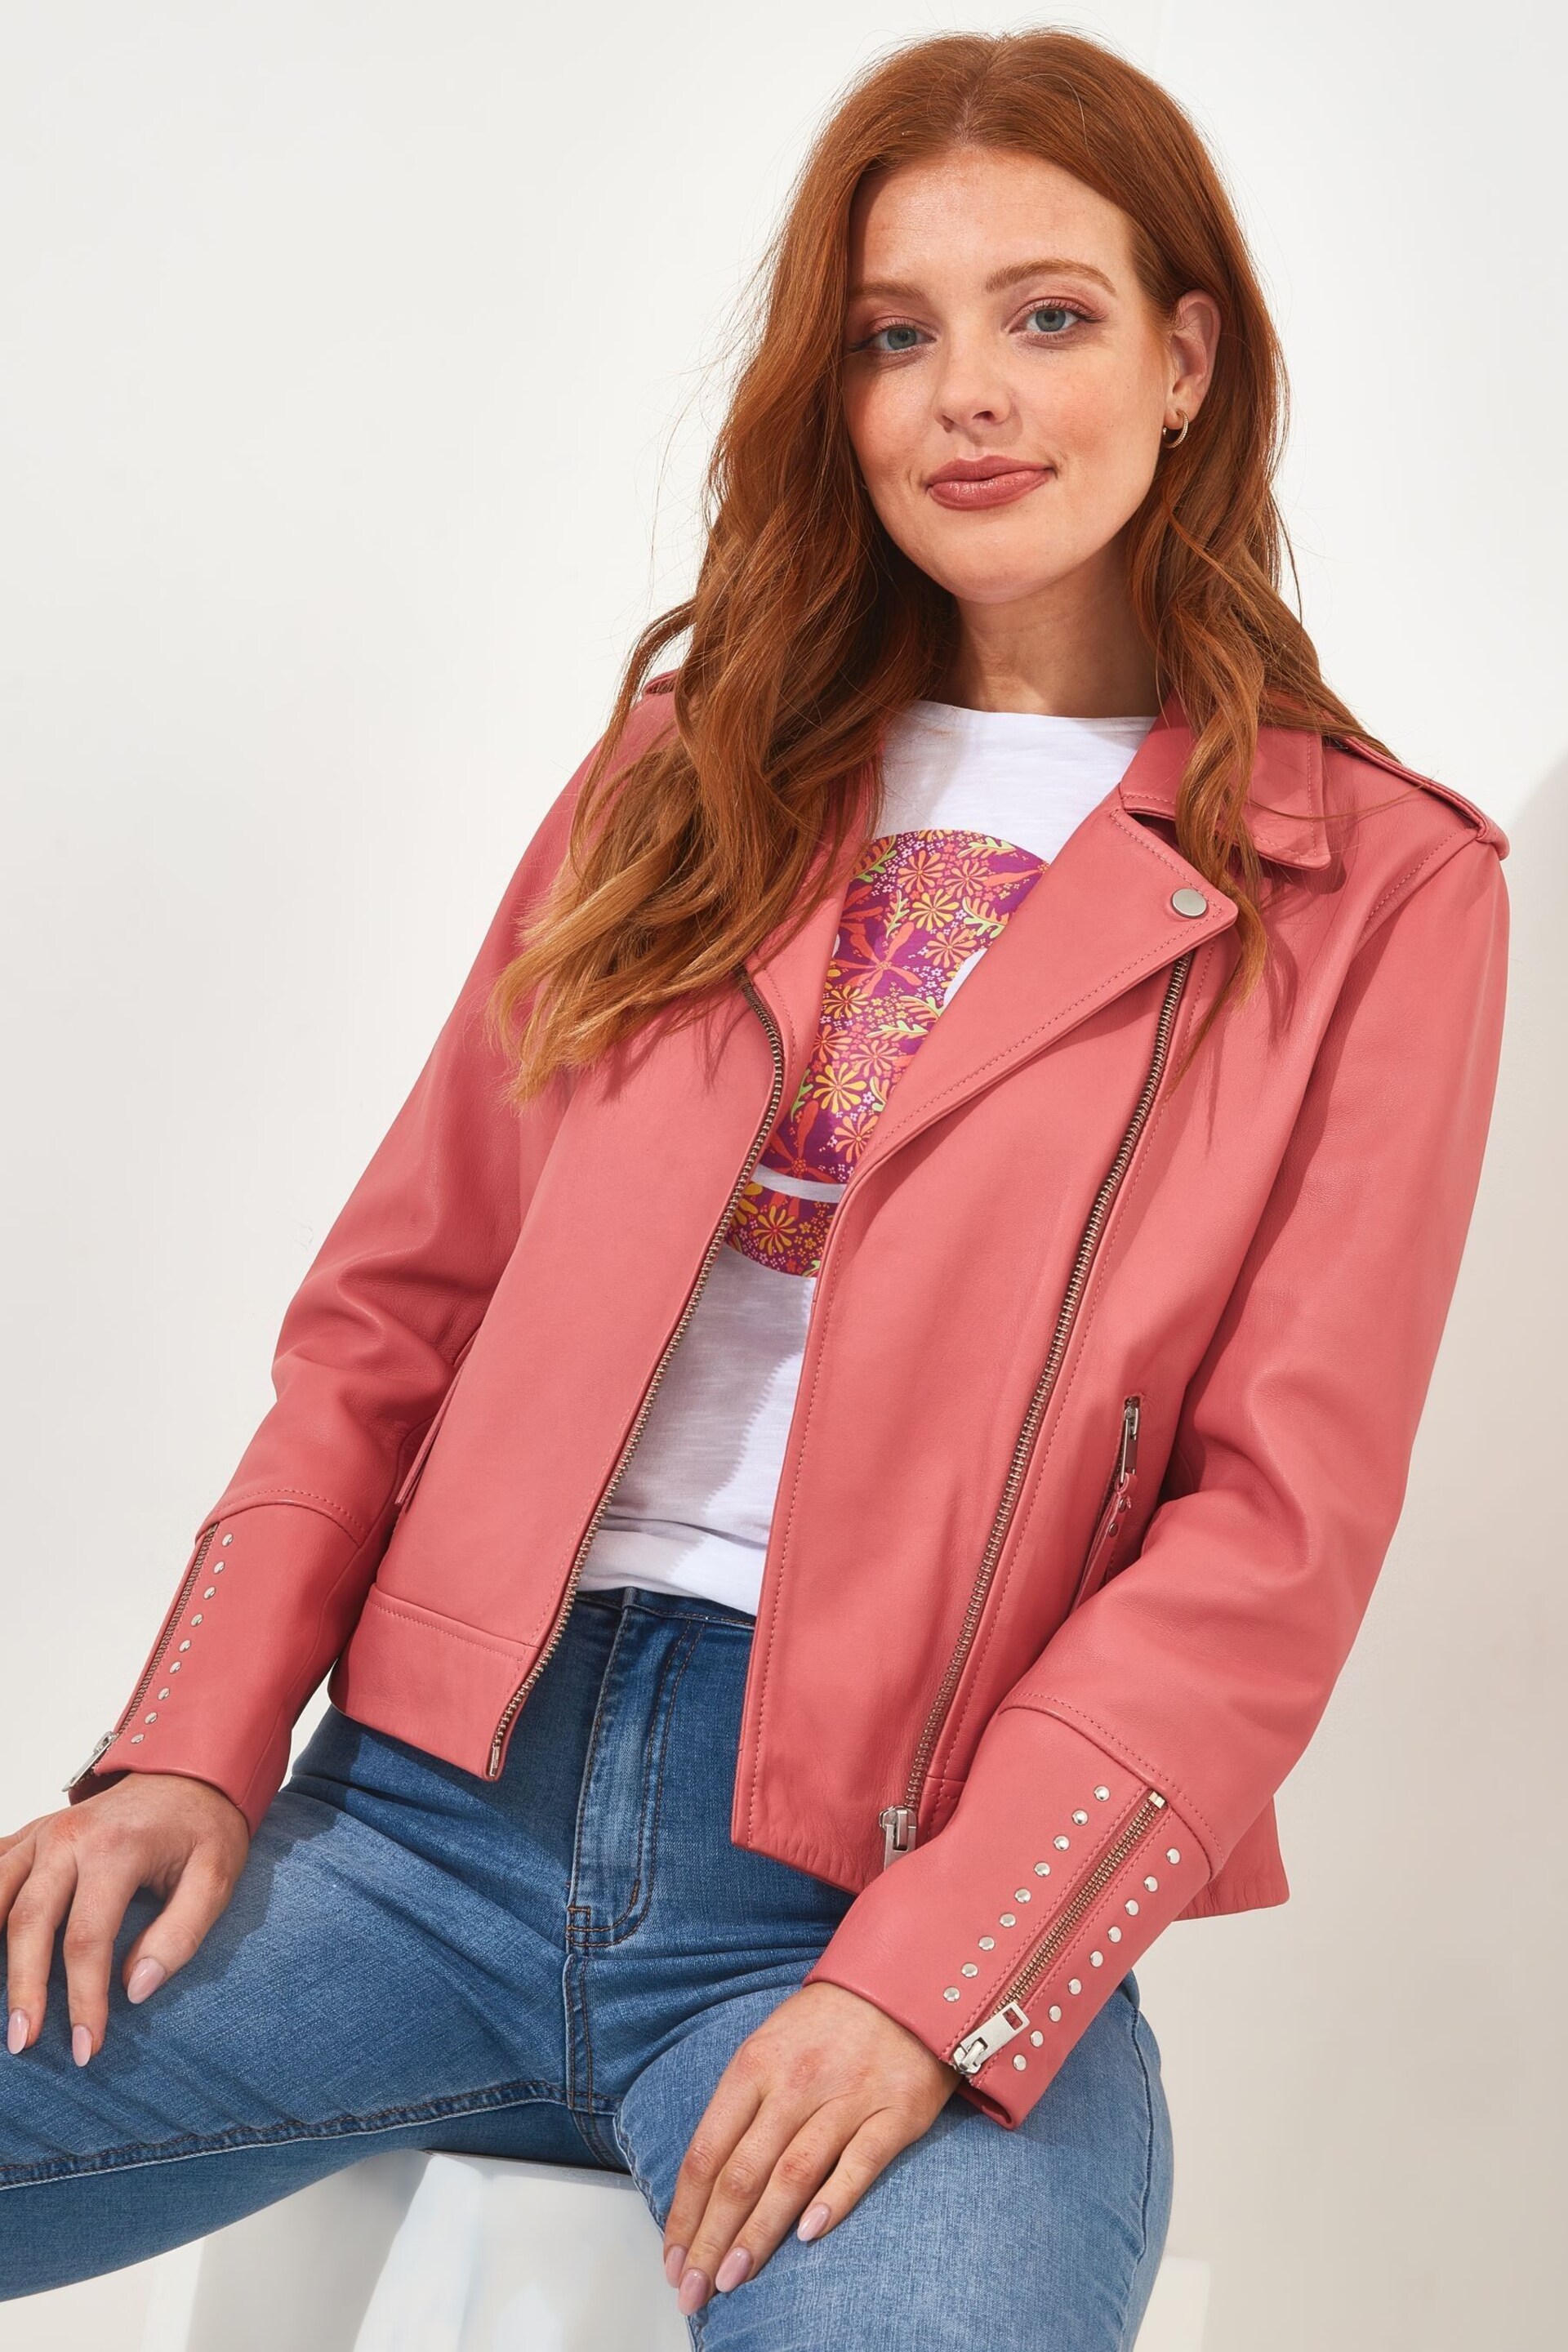 Joe Browns Pink Studded Cropped Leather Jacket - Image 1 of 5